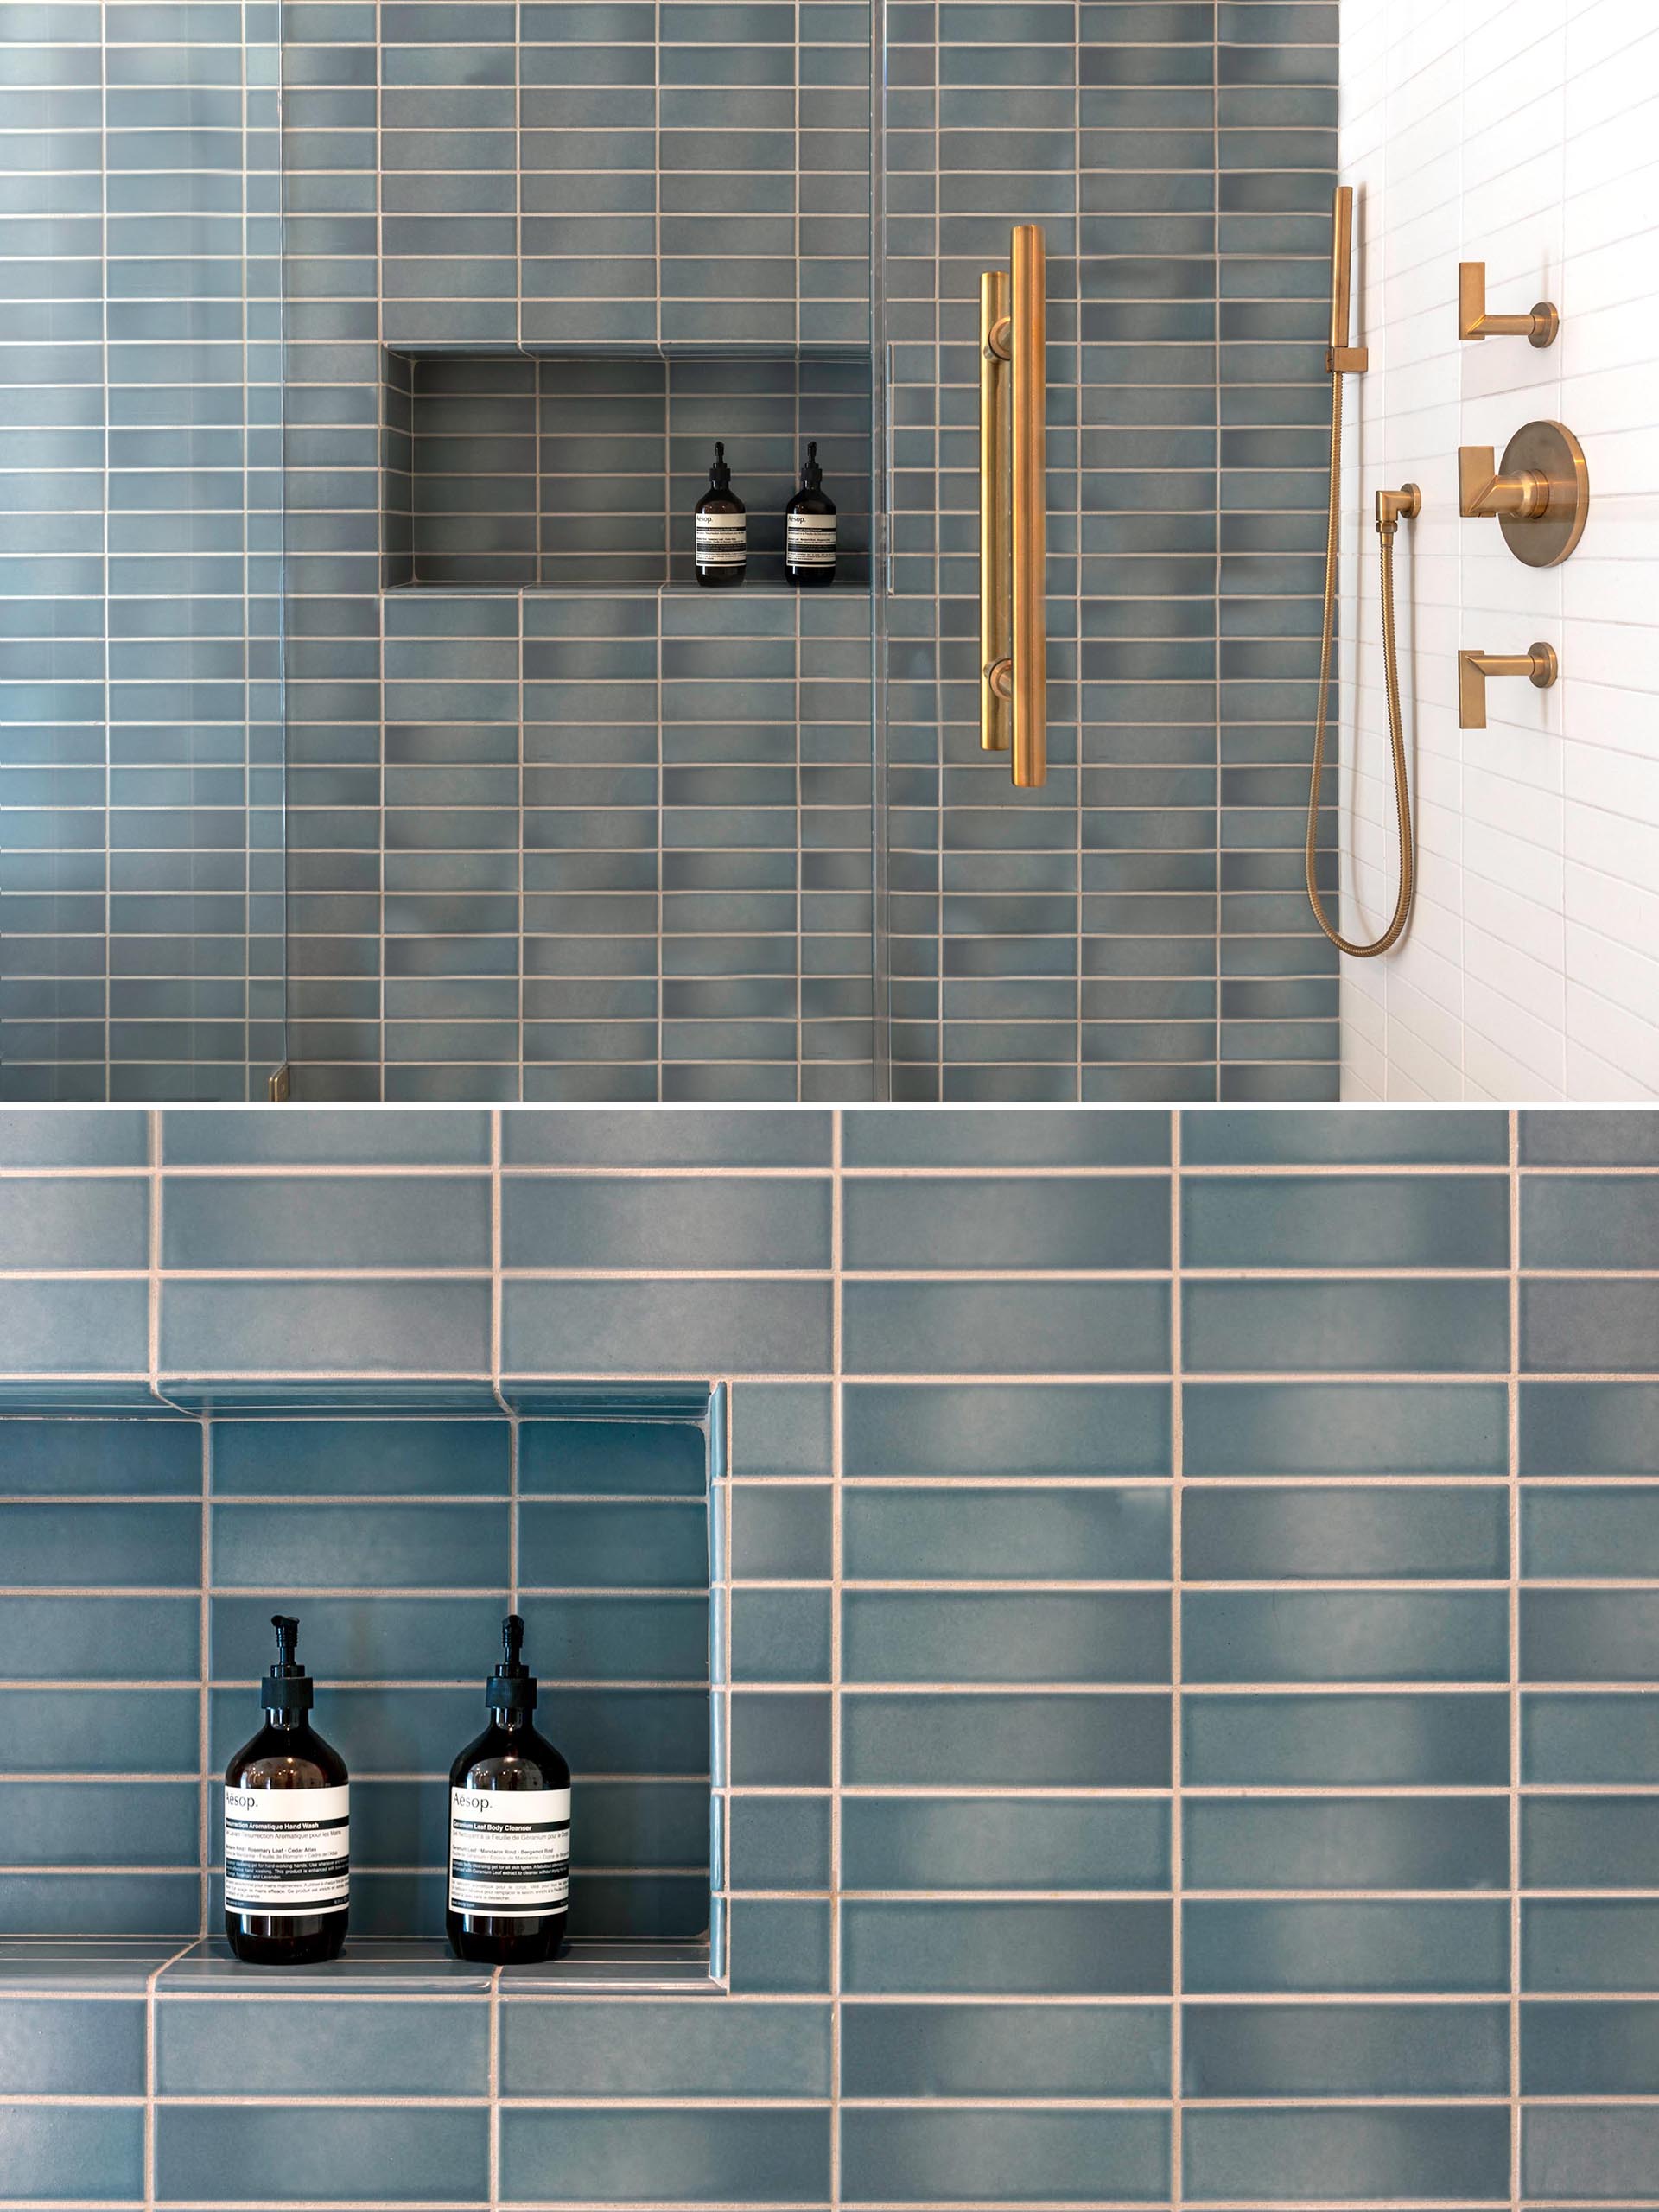 This modern bathroom with blue and white rectangular wall tile, a shower with a shelving niche, and brass fixtures.